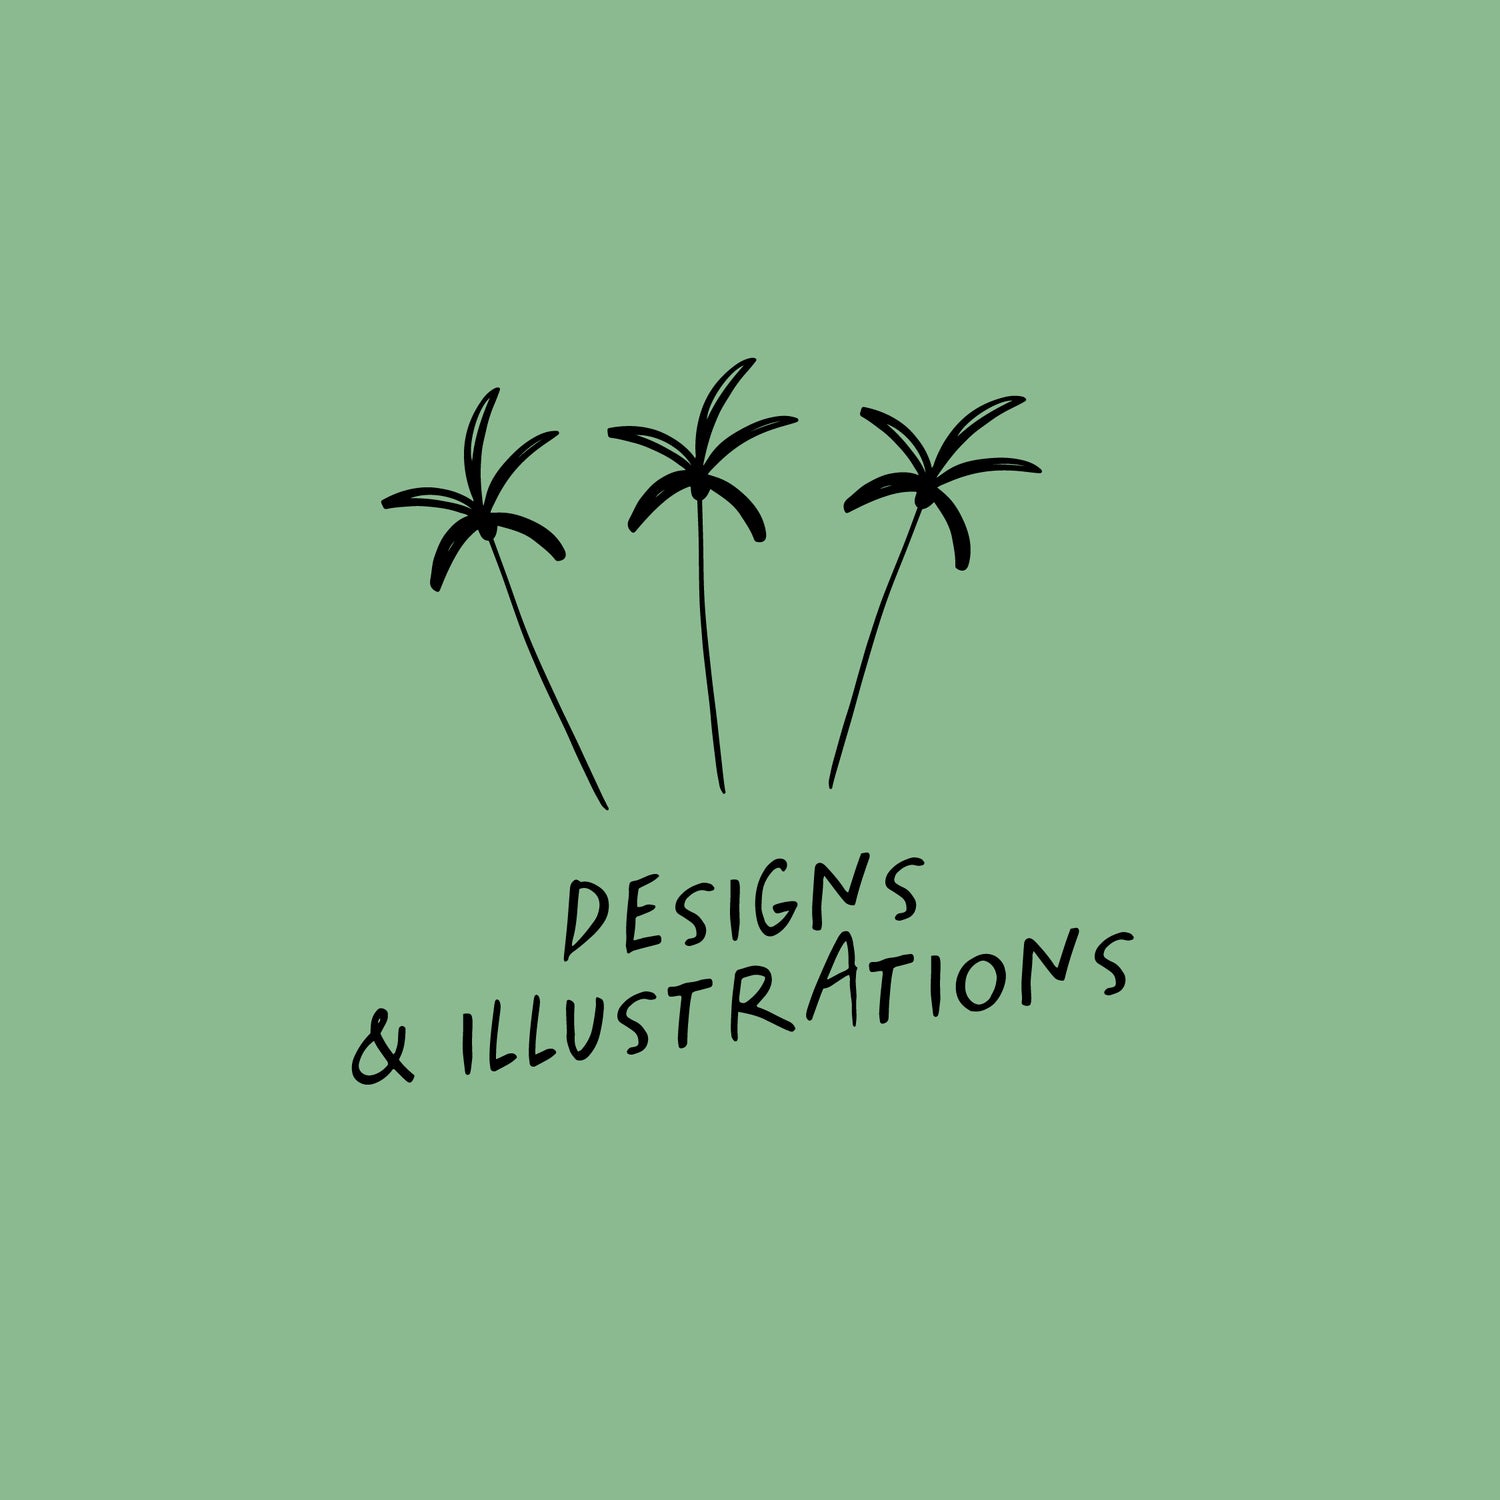 Designs and illustrations services